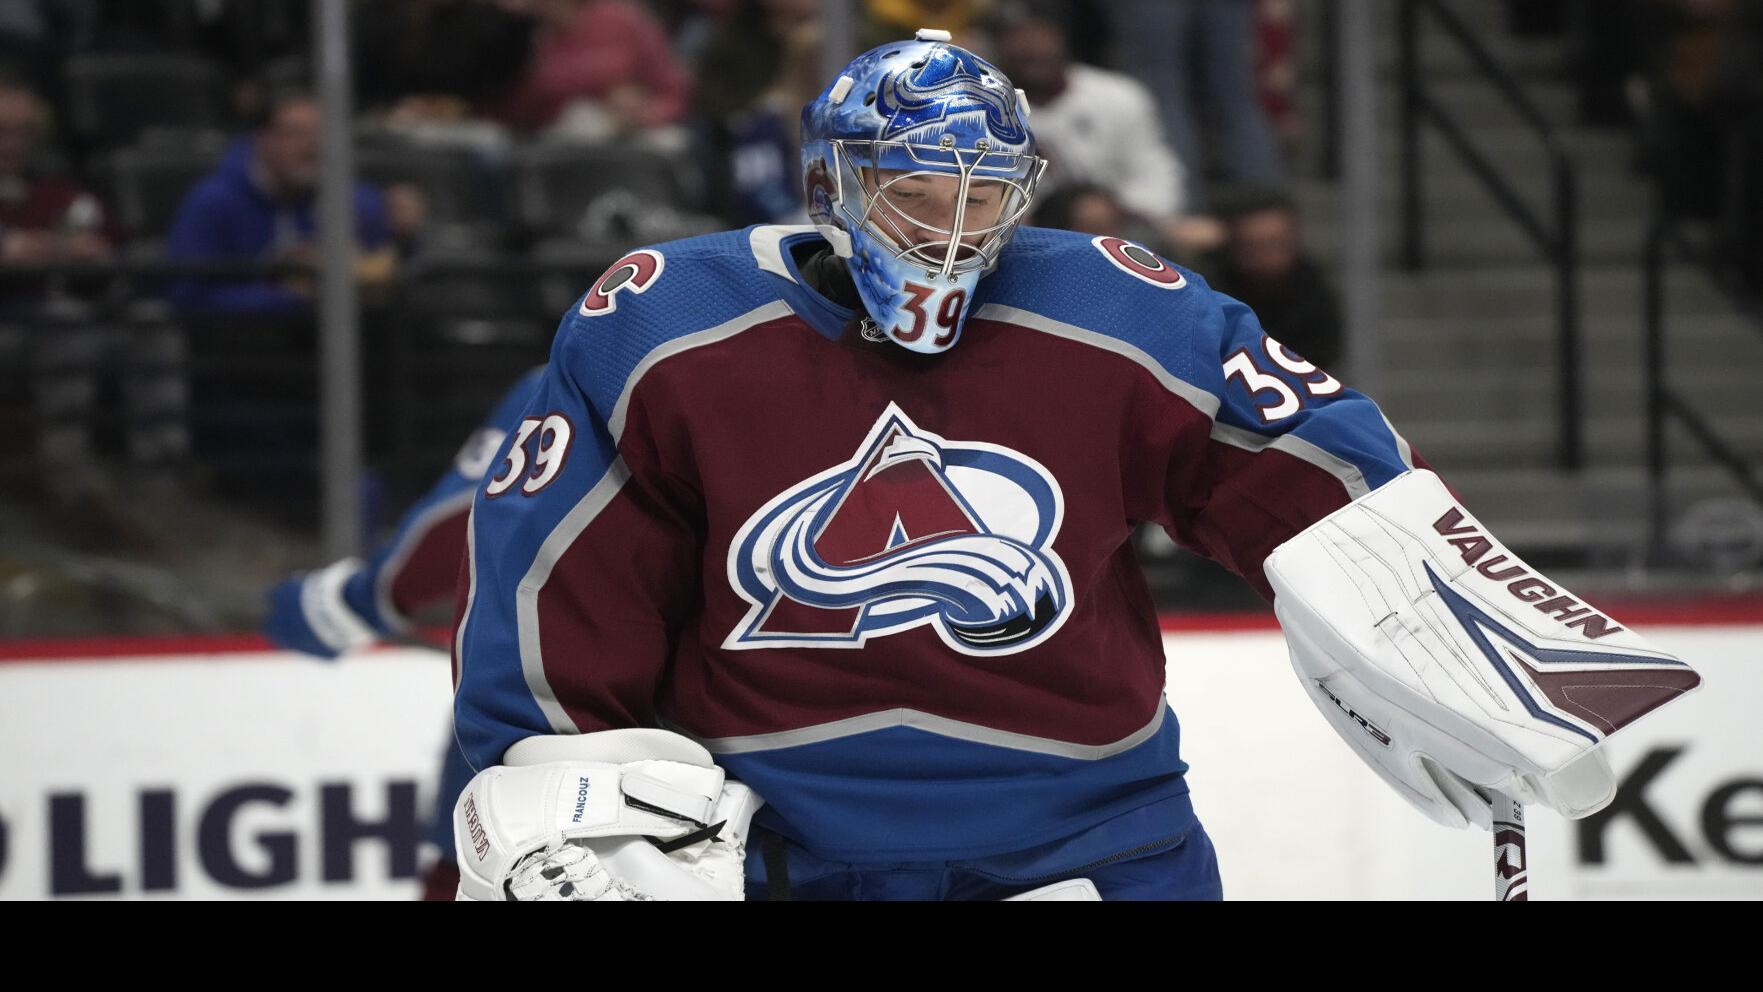 Avalanche appear to make minor changes to road jersey - Mile High Sports